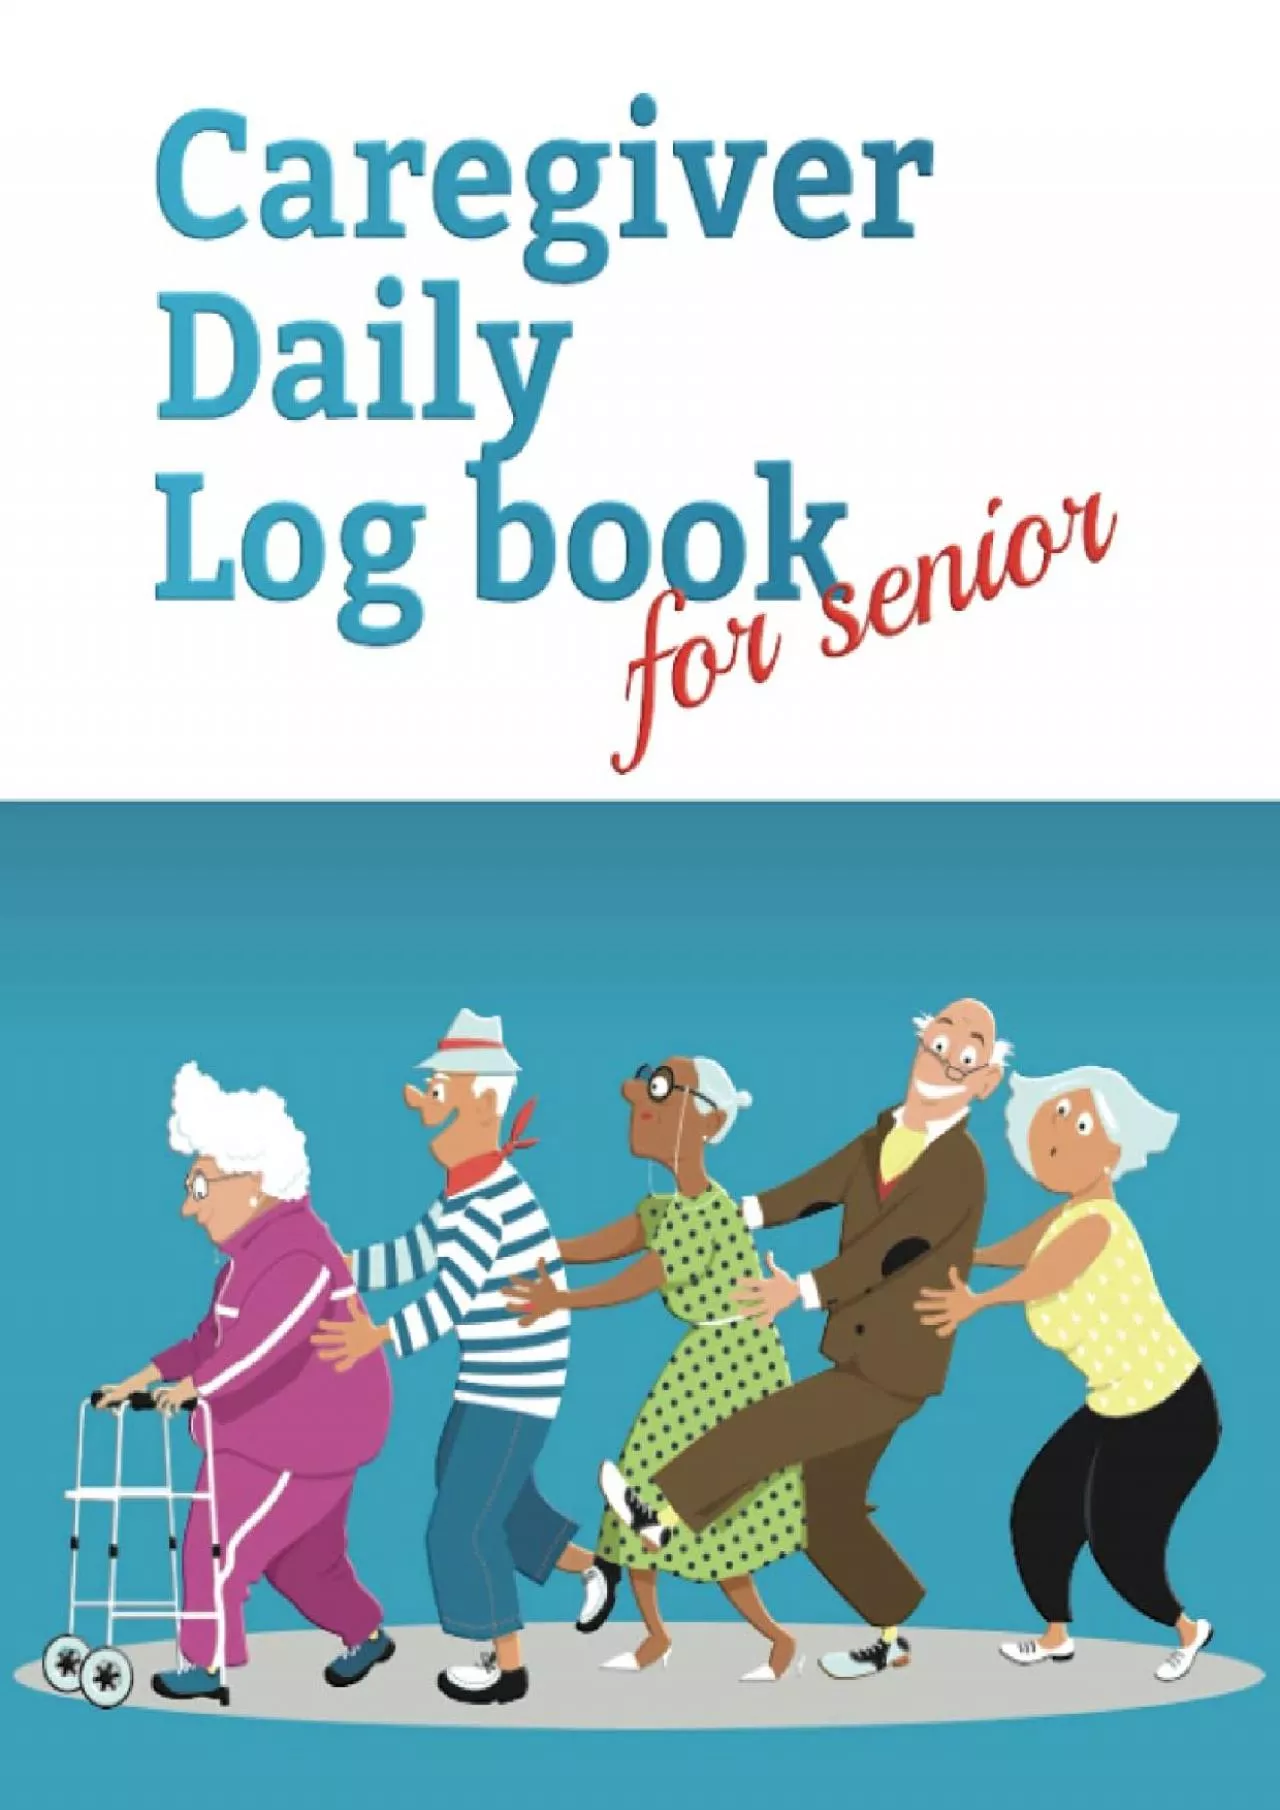 (DOWNLOAD)-Caregiver Daily Log Book for senior: Record details of care given each day